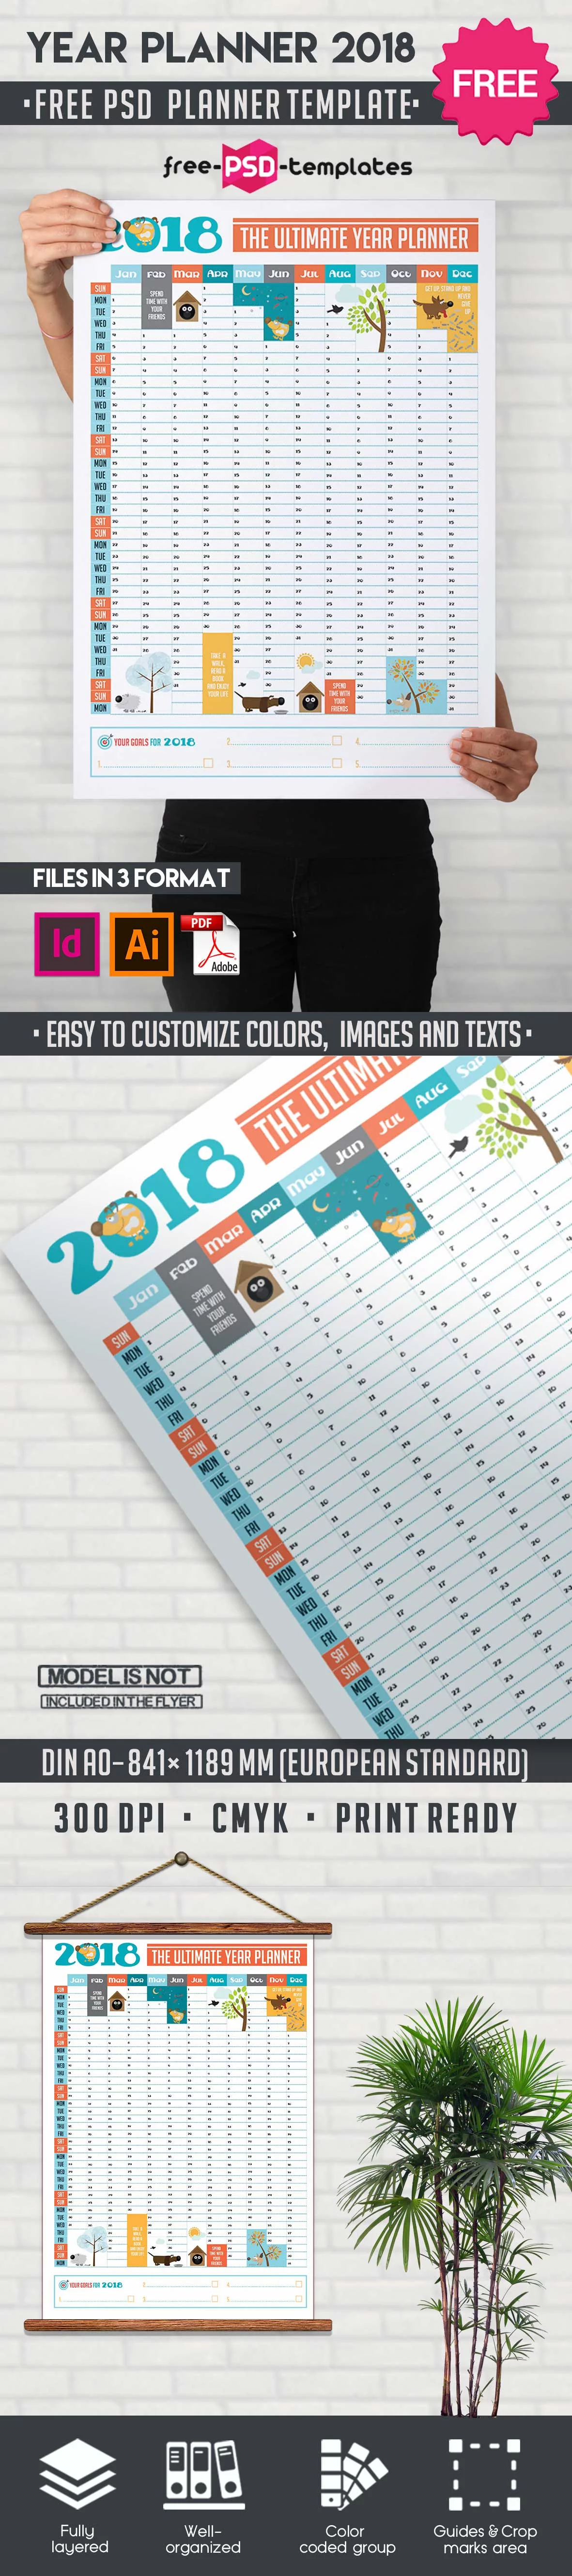 Free 2018 Year Planner Template